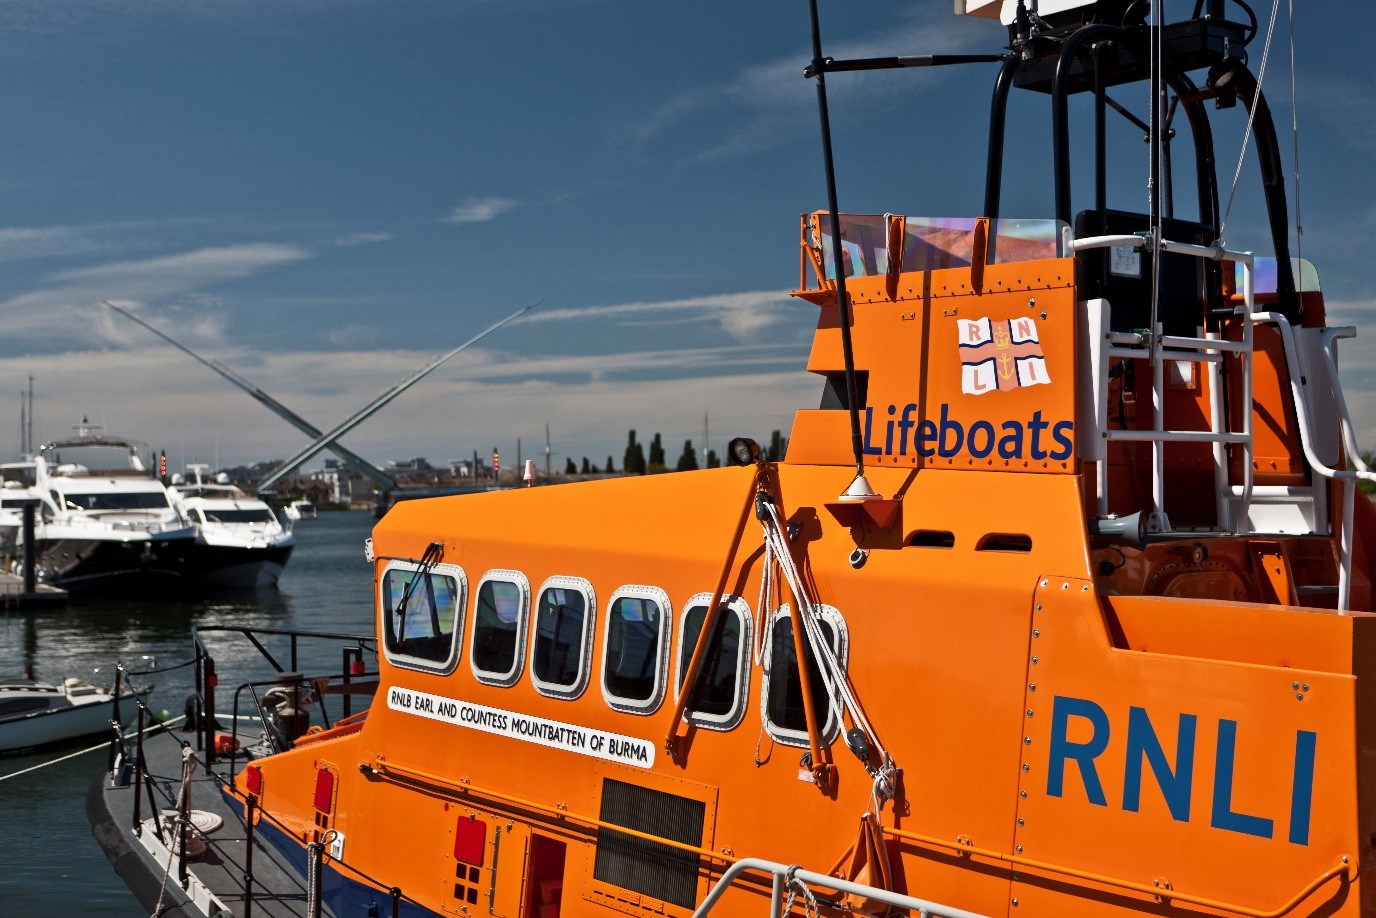 RNLI lifeboat on the water